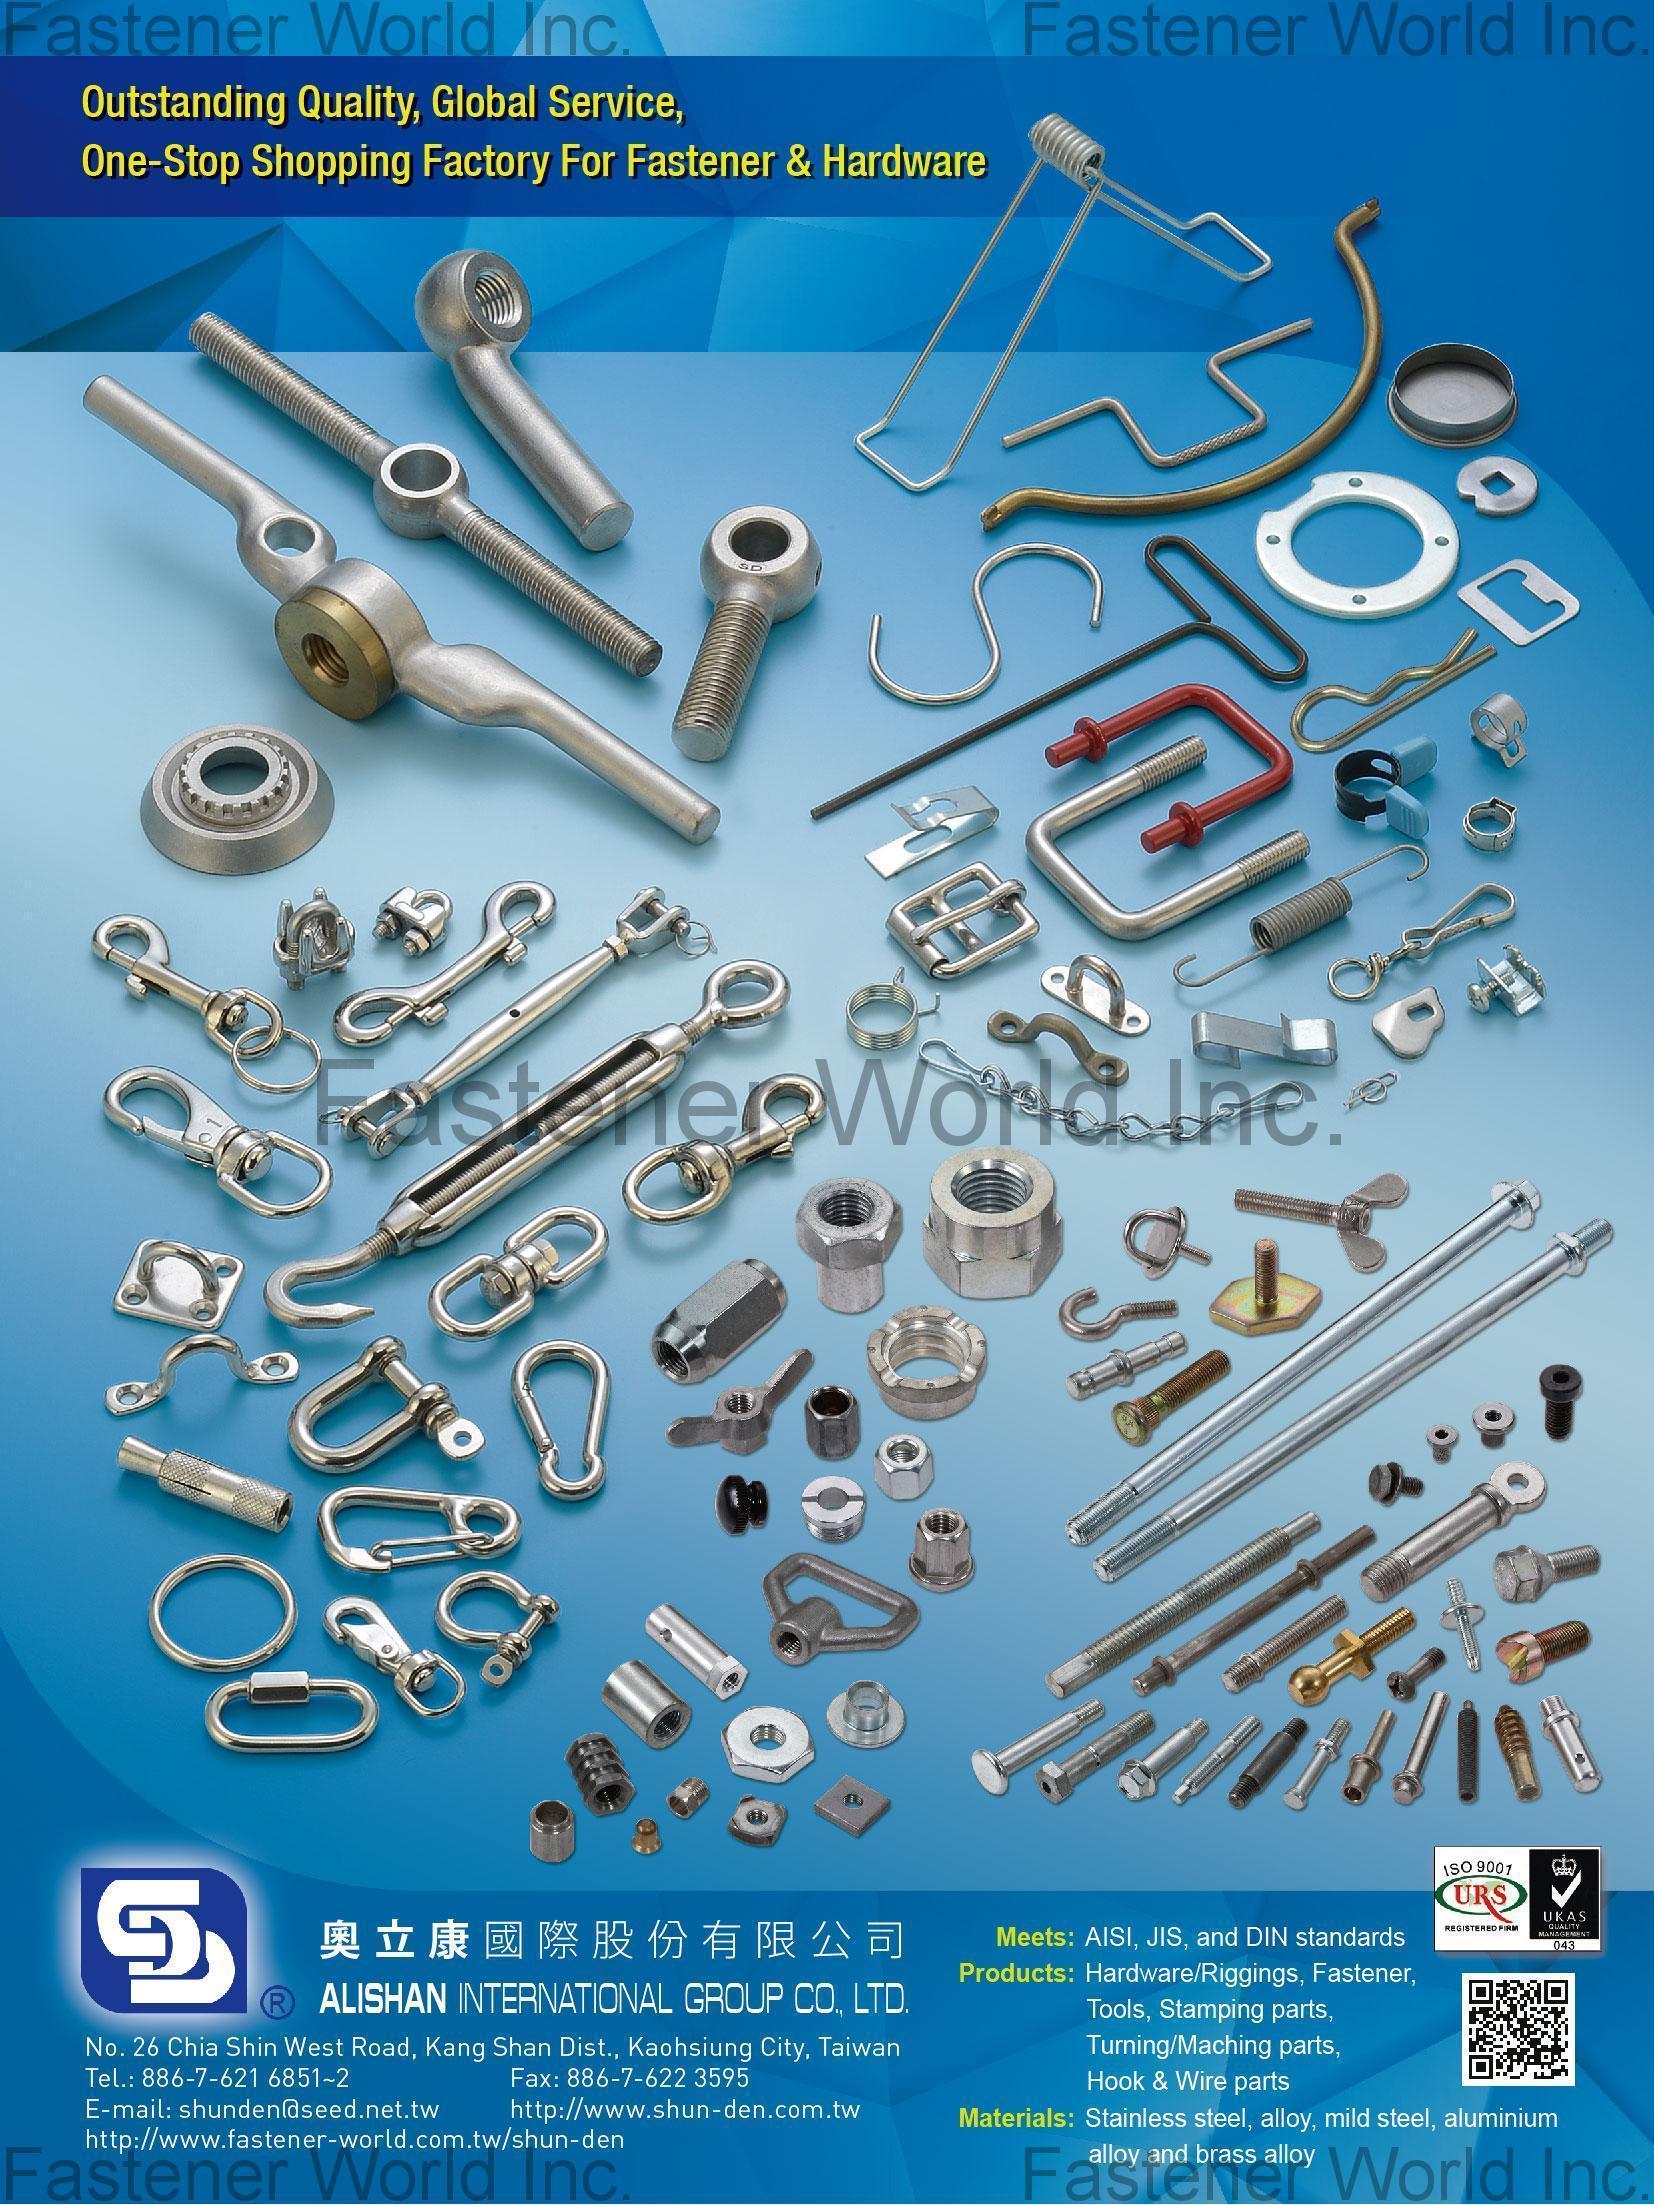 ALISHAN INTERNATIONAL GROUP CO., LTD. , Fastener tools, Bolts & Screws, Nuts, Link Chains & Steel Wire Rope products, Turning & Cutting parts, Stamping parts, Hardware & Rigging, Casting & Forging parts, Wrought (Forged)-Products , Bit & Bits Sets